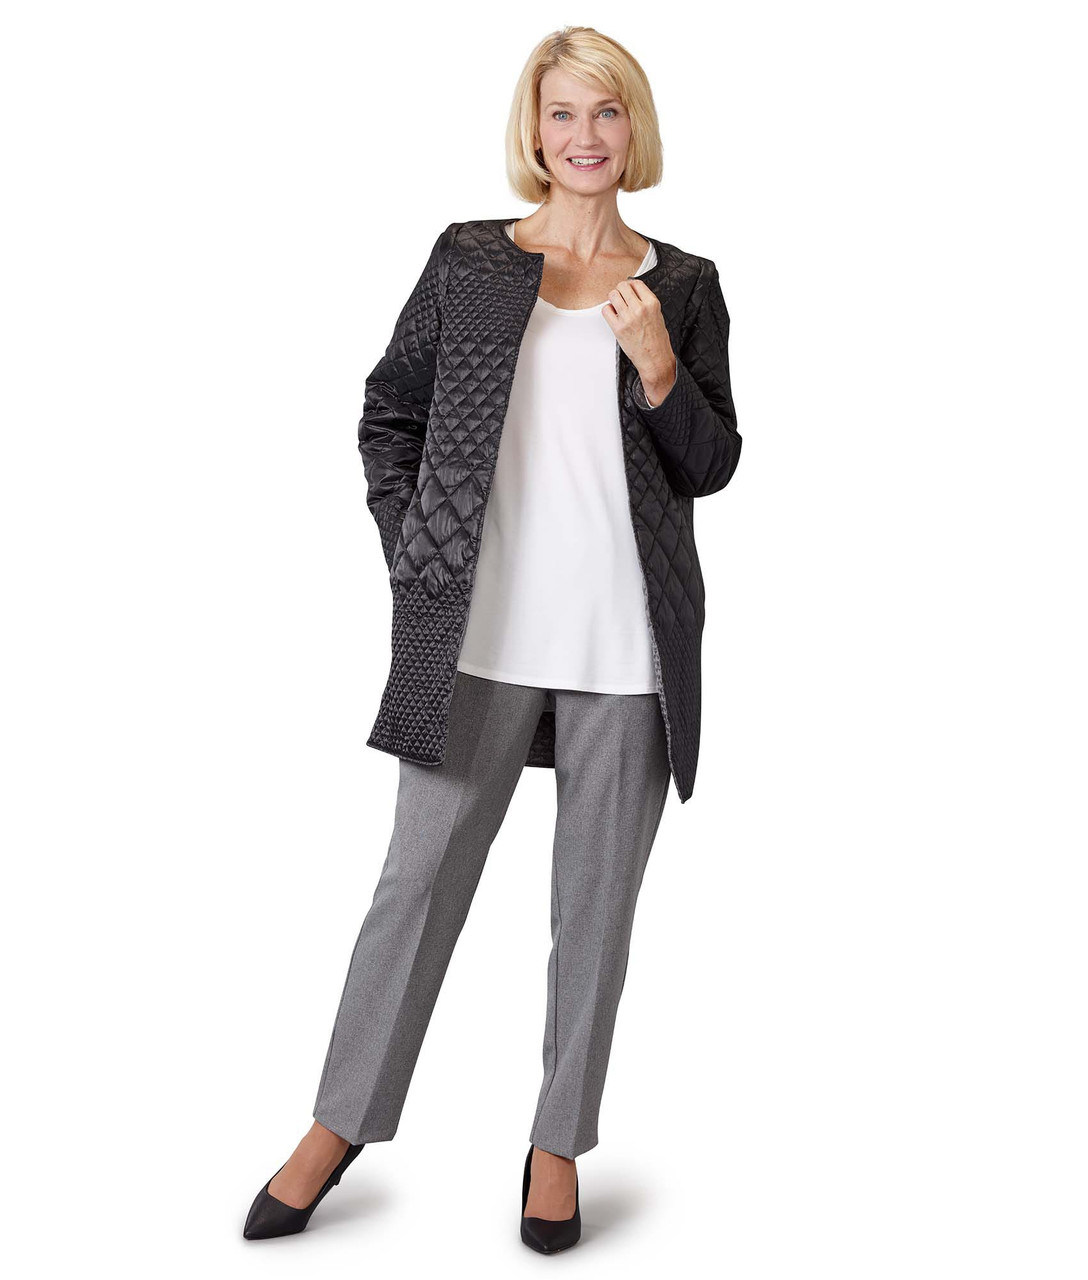 Silverts SV27040 Womens Reversible Quilted Jacket with Detachable Sleeves Black/Silver, Size=XL, SV27040-SV1452-XL